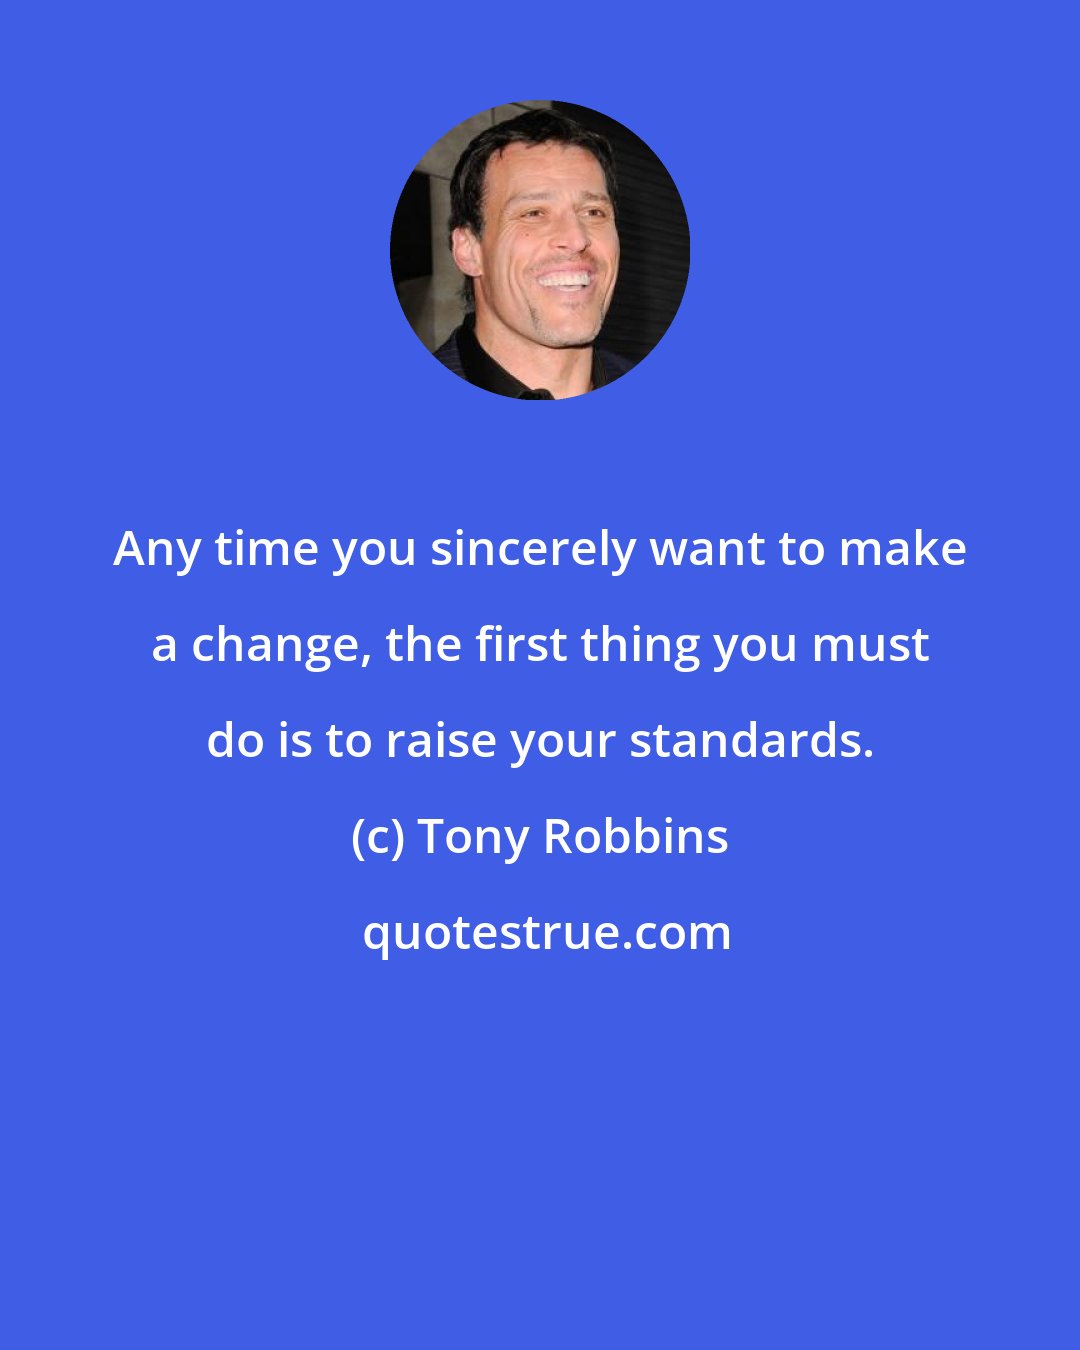 Tony Robbins: Any time you sincerely want to make a change, the first thing you must do is to raise your standards.